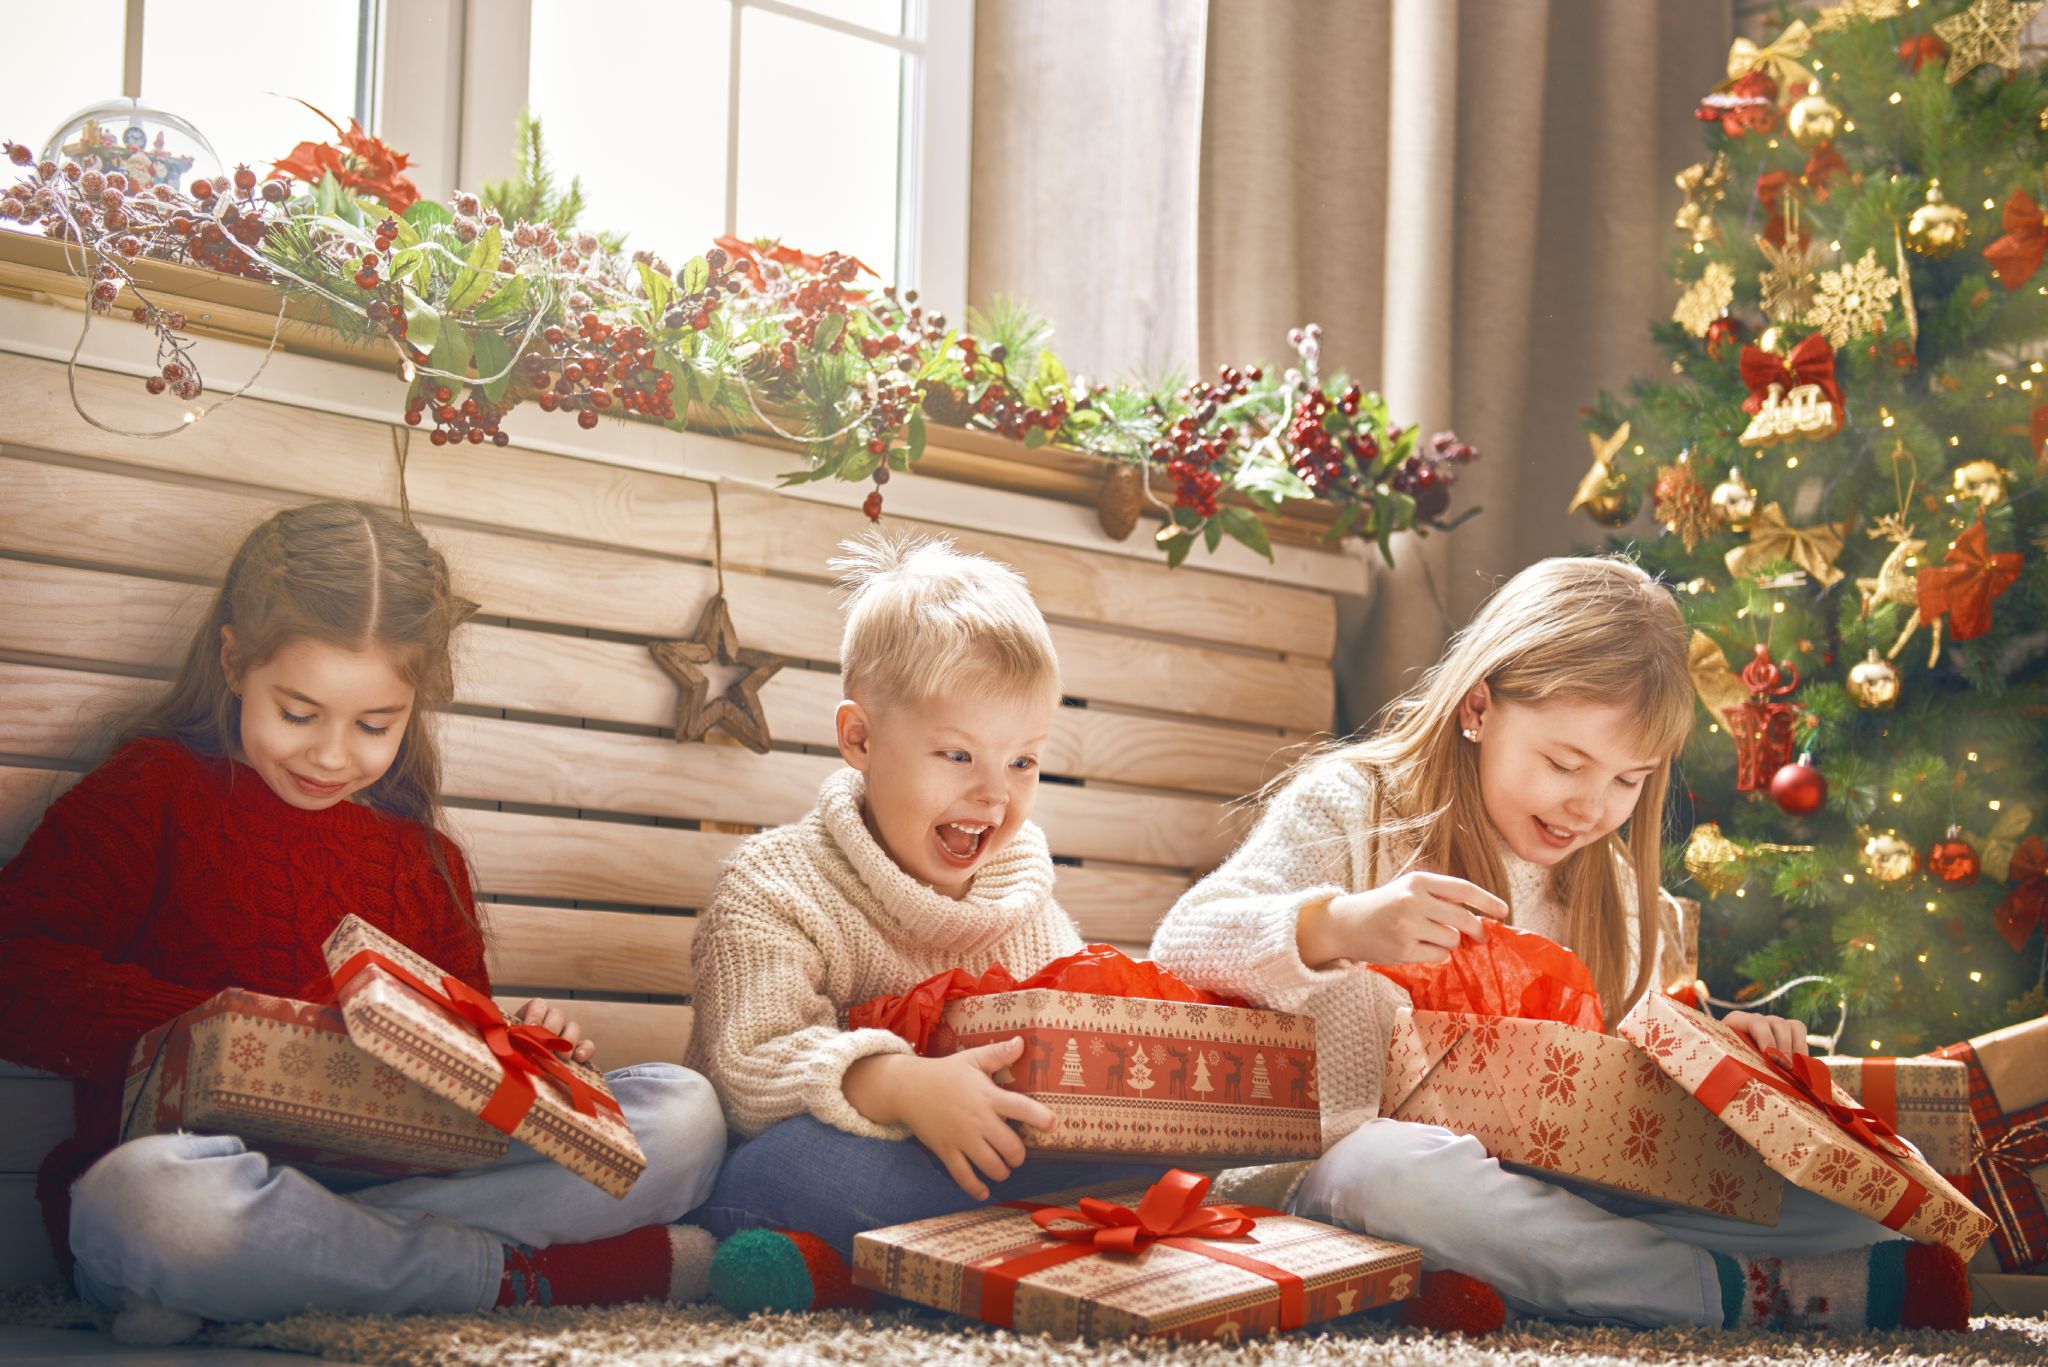 Children with their presents by the Christmas tree